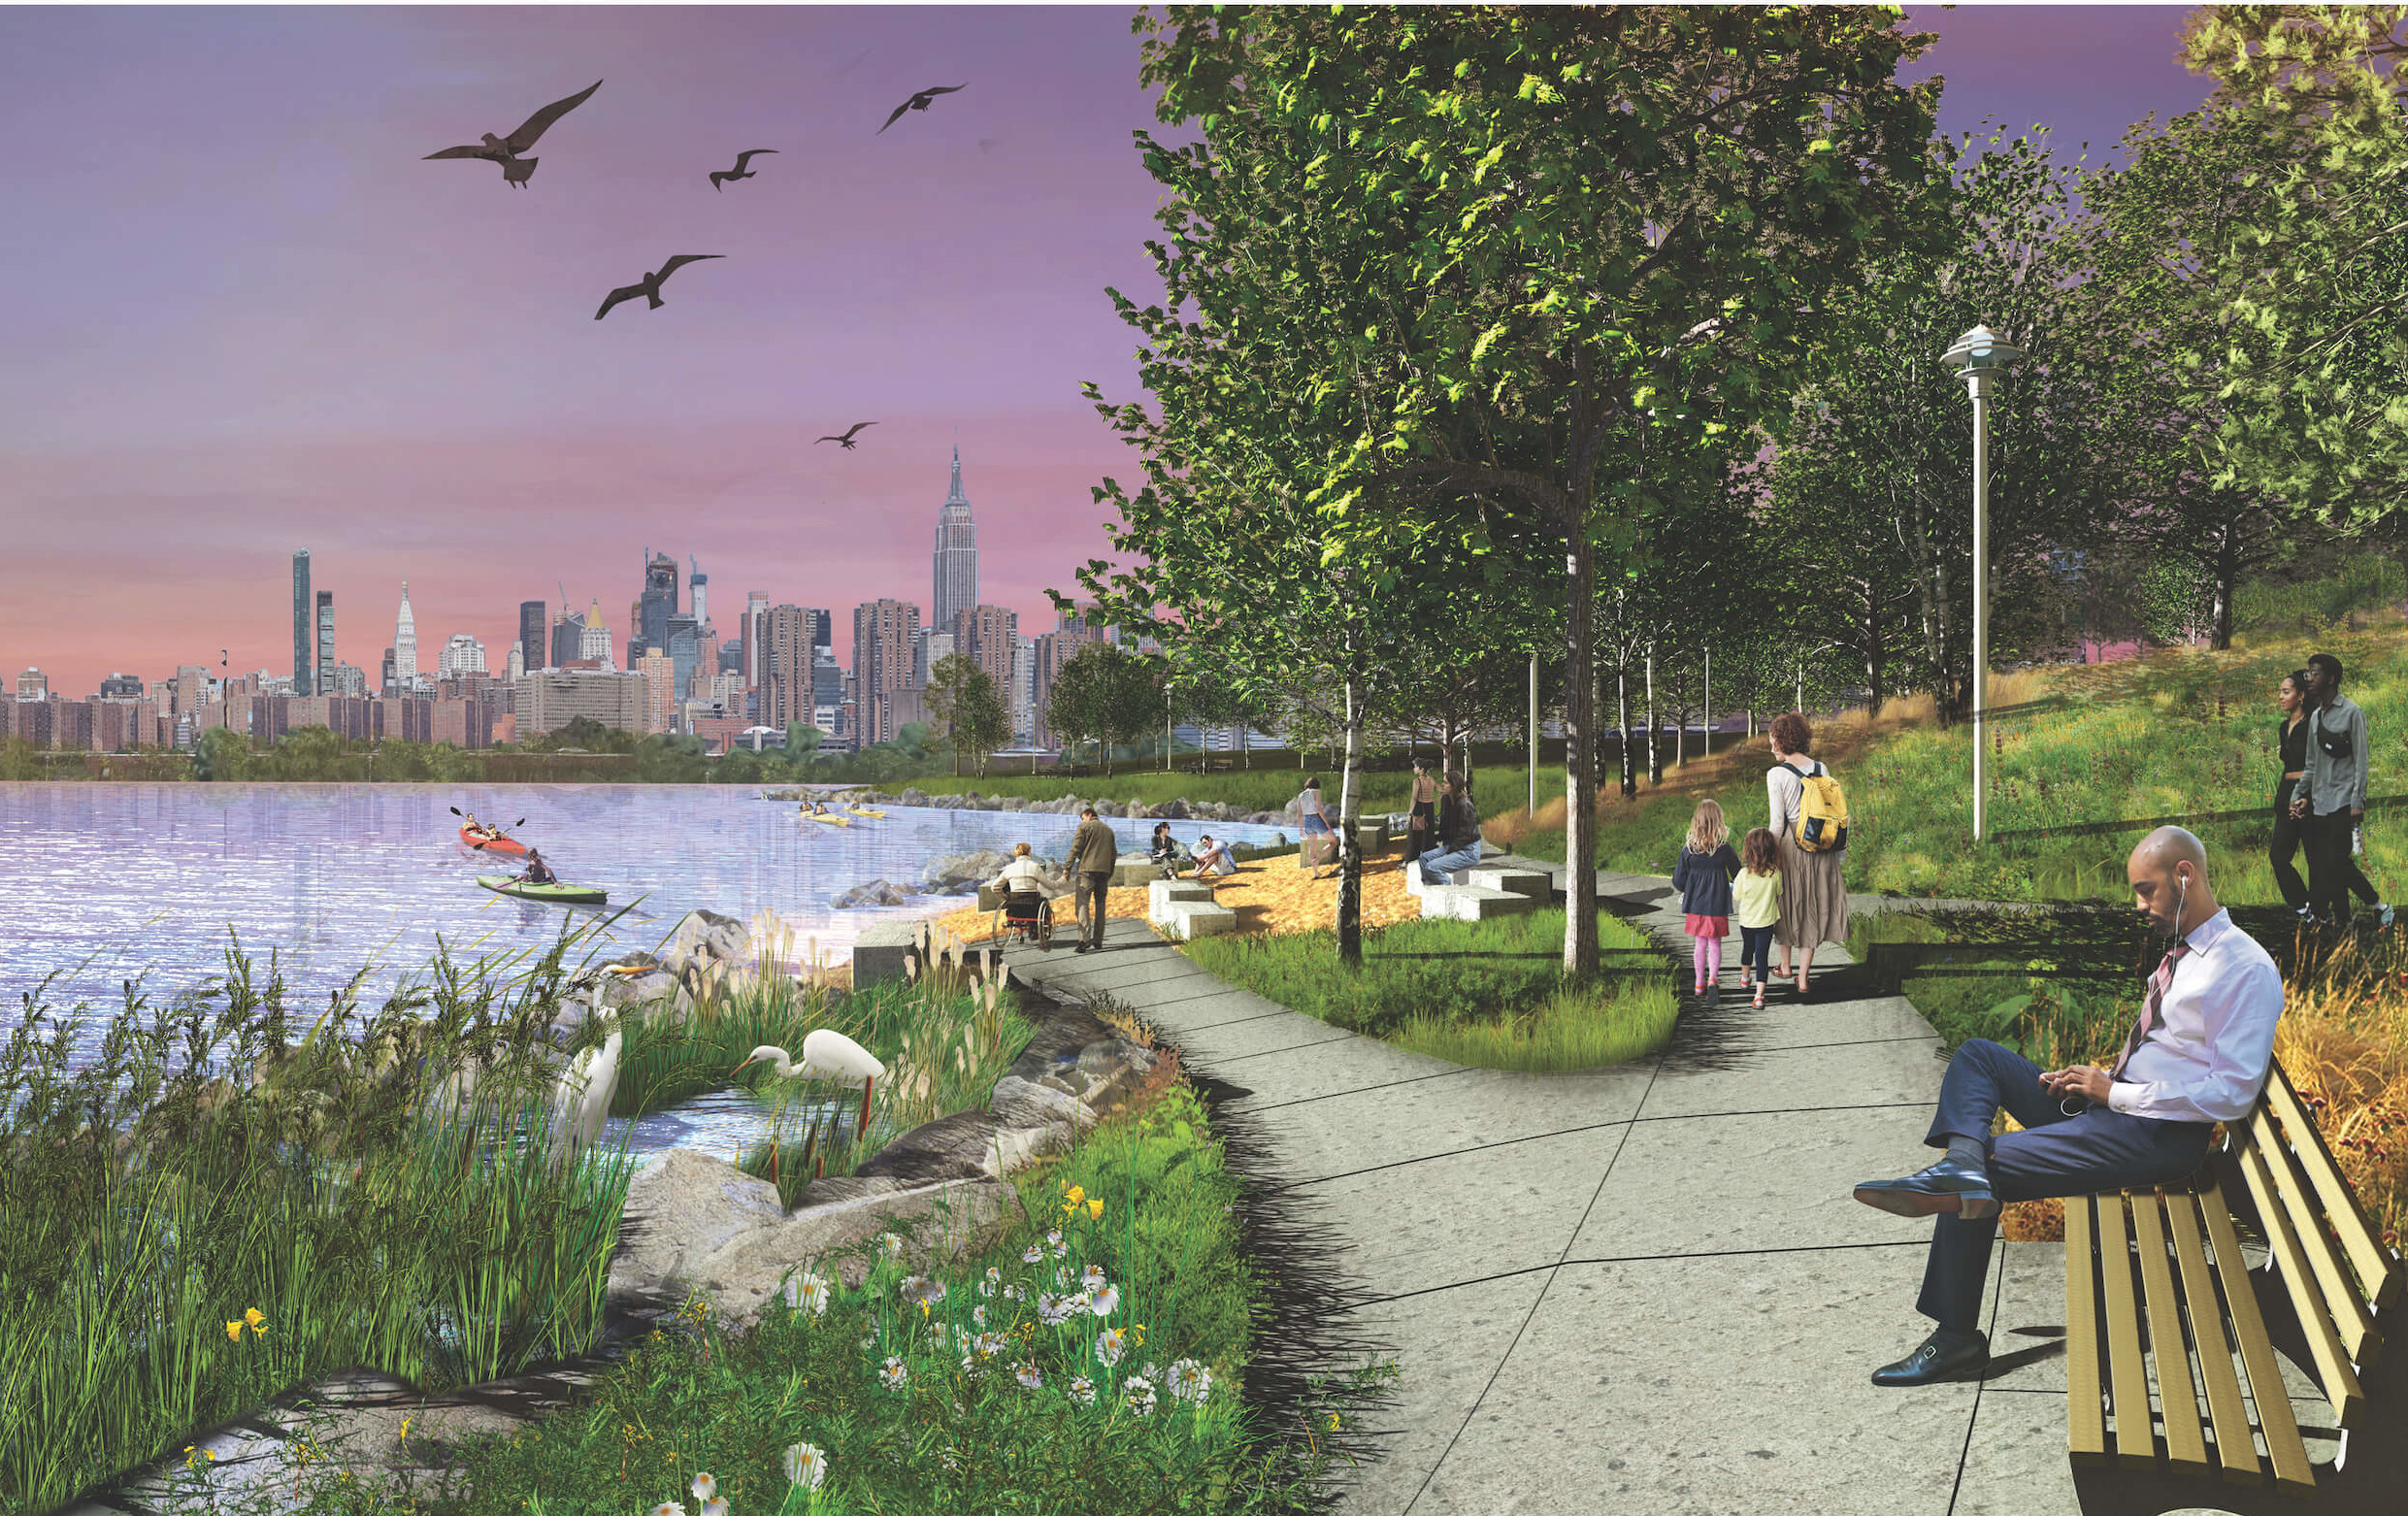 rendering of people relaxing along a waterfront park